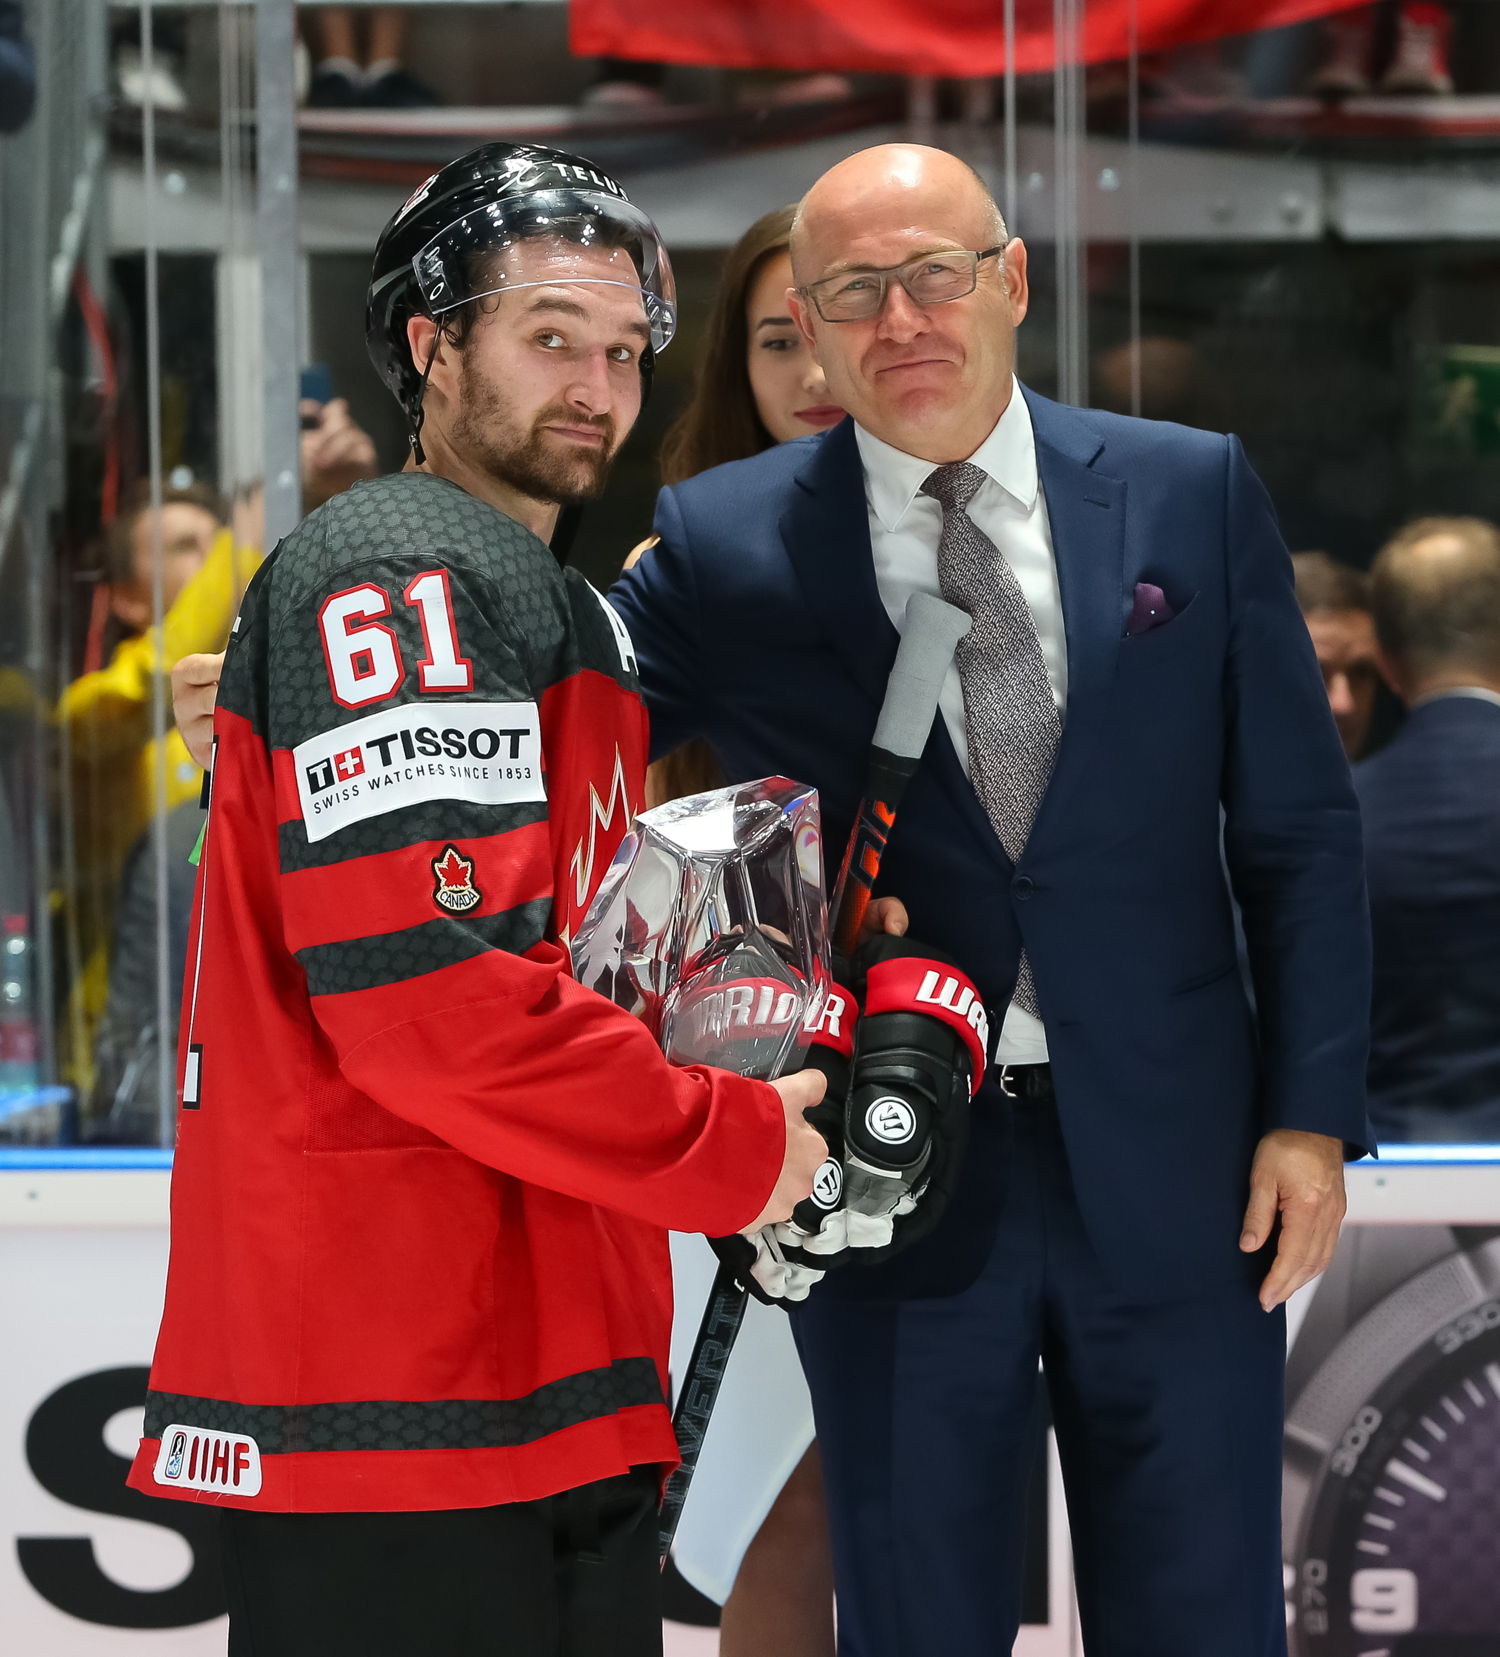 ŠKODA CEO Bernhard Maier presented the trophy
created by ŠKODA Design for the Most Valuable
Player of the tournament to Canadian national player
Mark Stone.